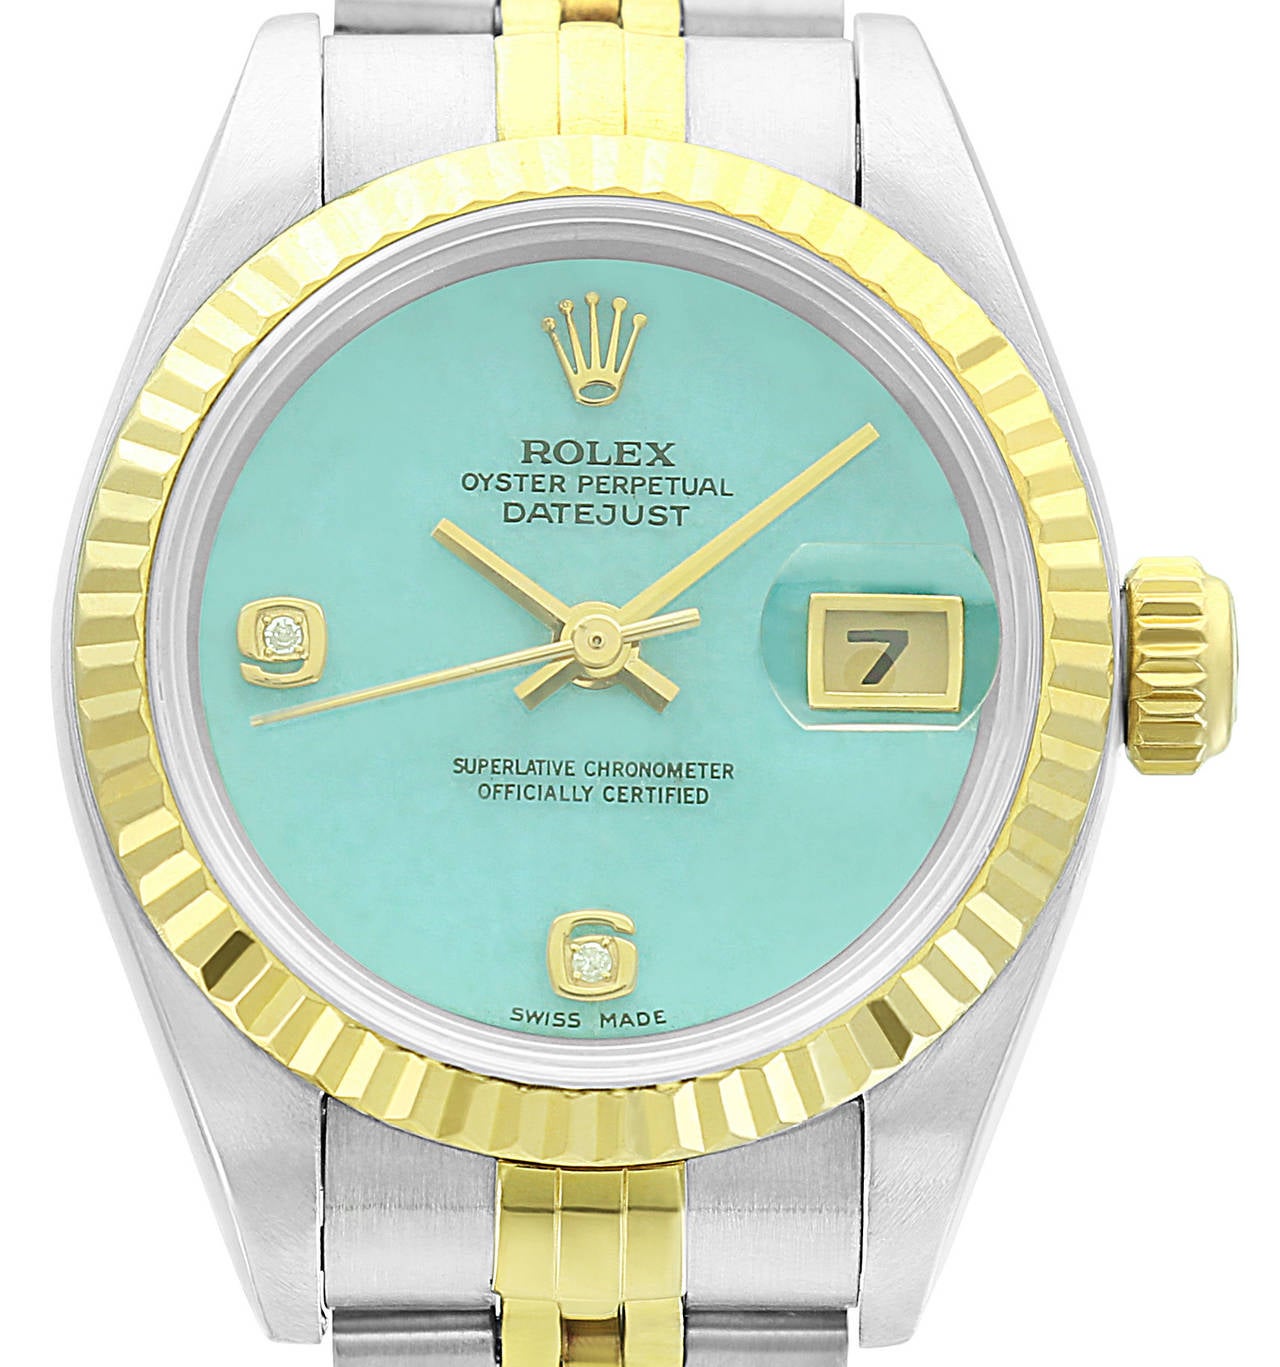 This 1990s Rolex Datejust adds an interesting twist with its original, factory turquoise and diamond dial. There are a number of examples of regular two-tone Rolex Datejusts on the market, but this one is sure to set yours apart from the rest.